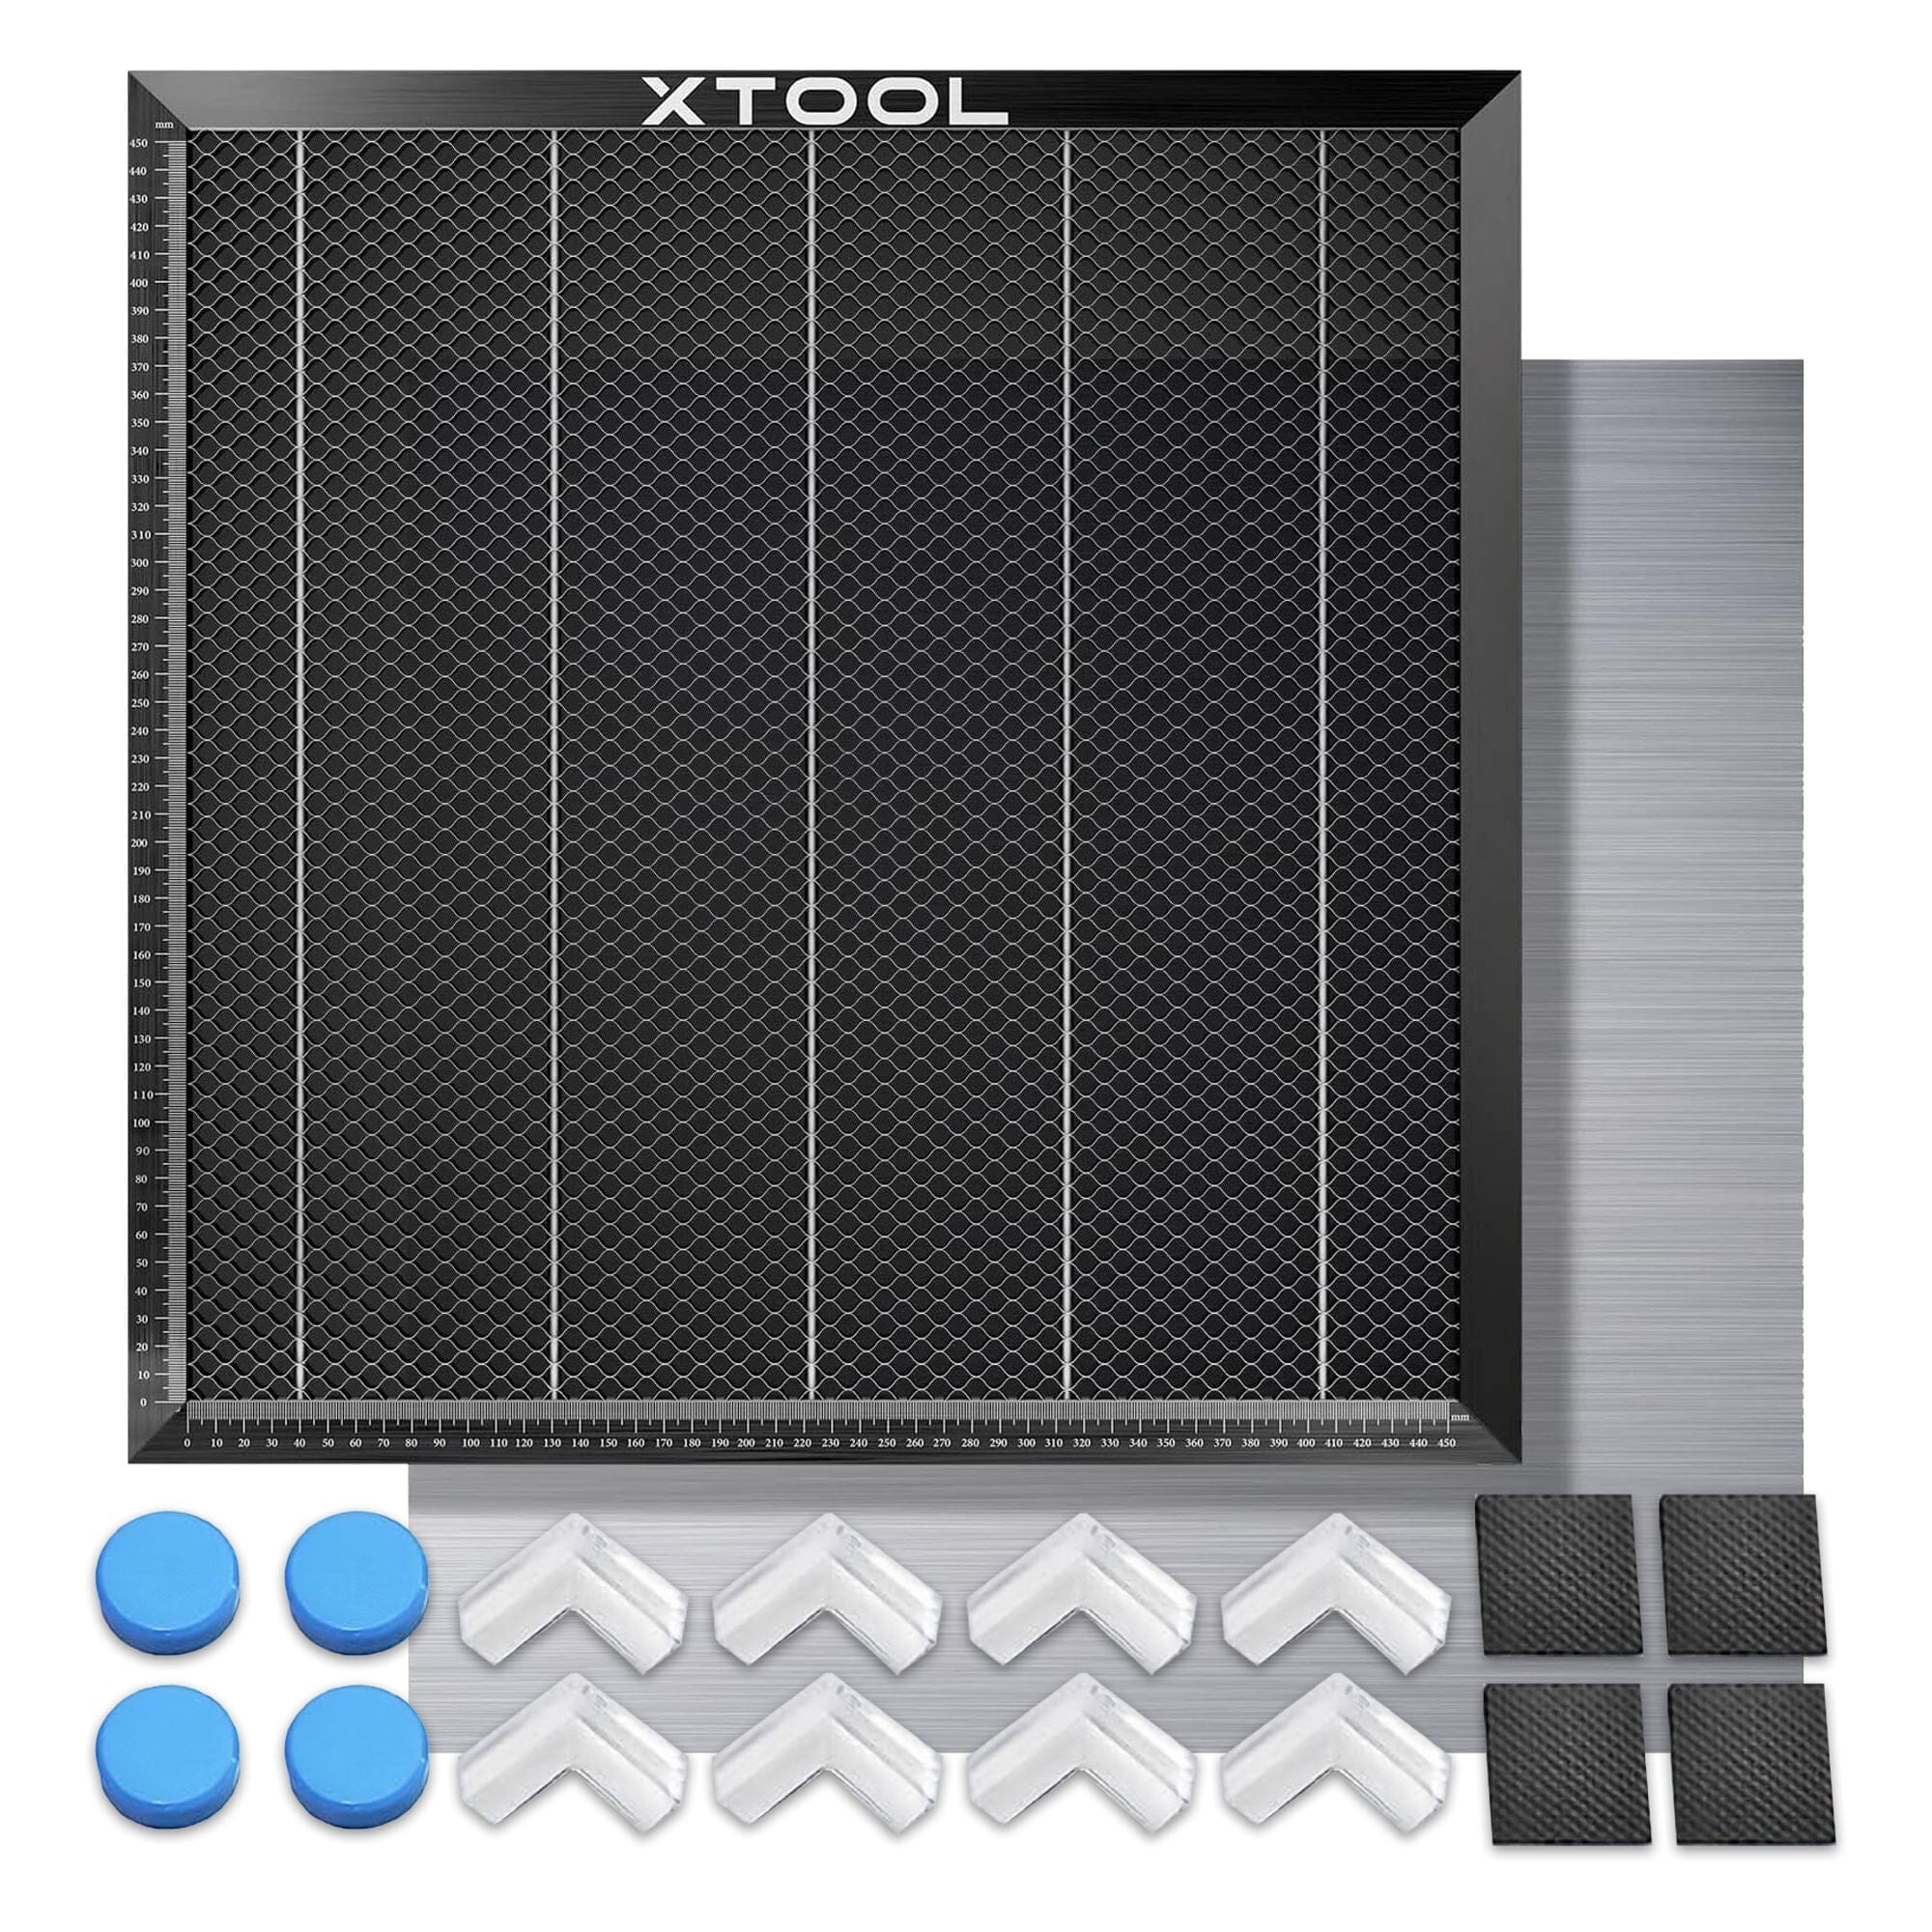 xTool D1 Pro 10W 2.0 Laser Cutter and Engraver: Buy or Lease at